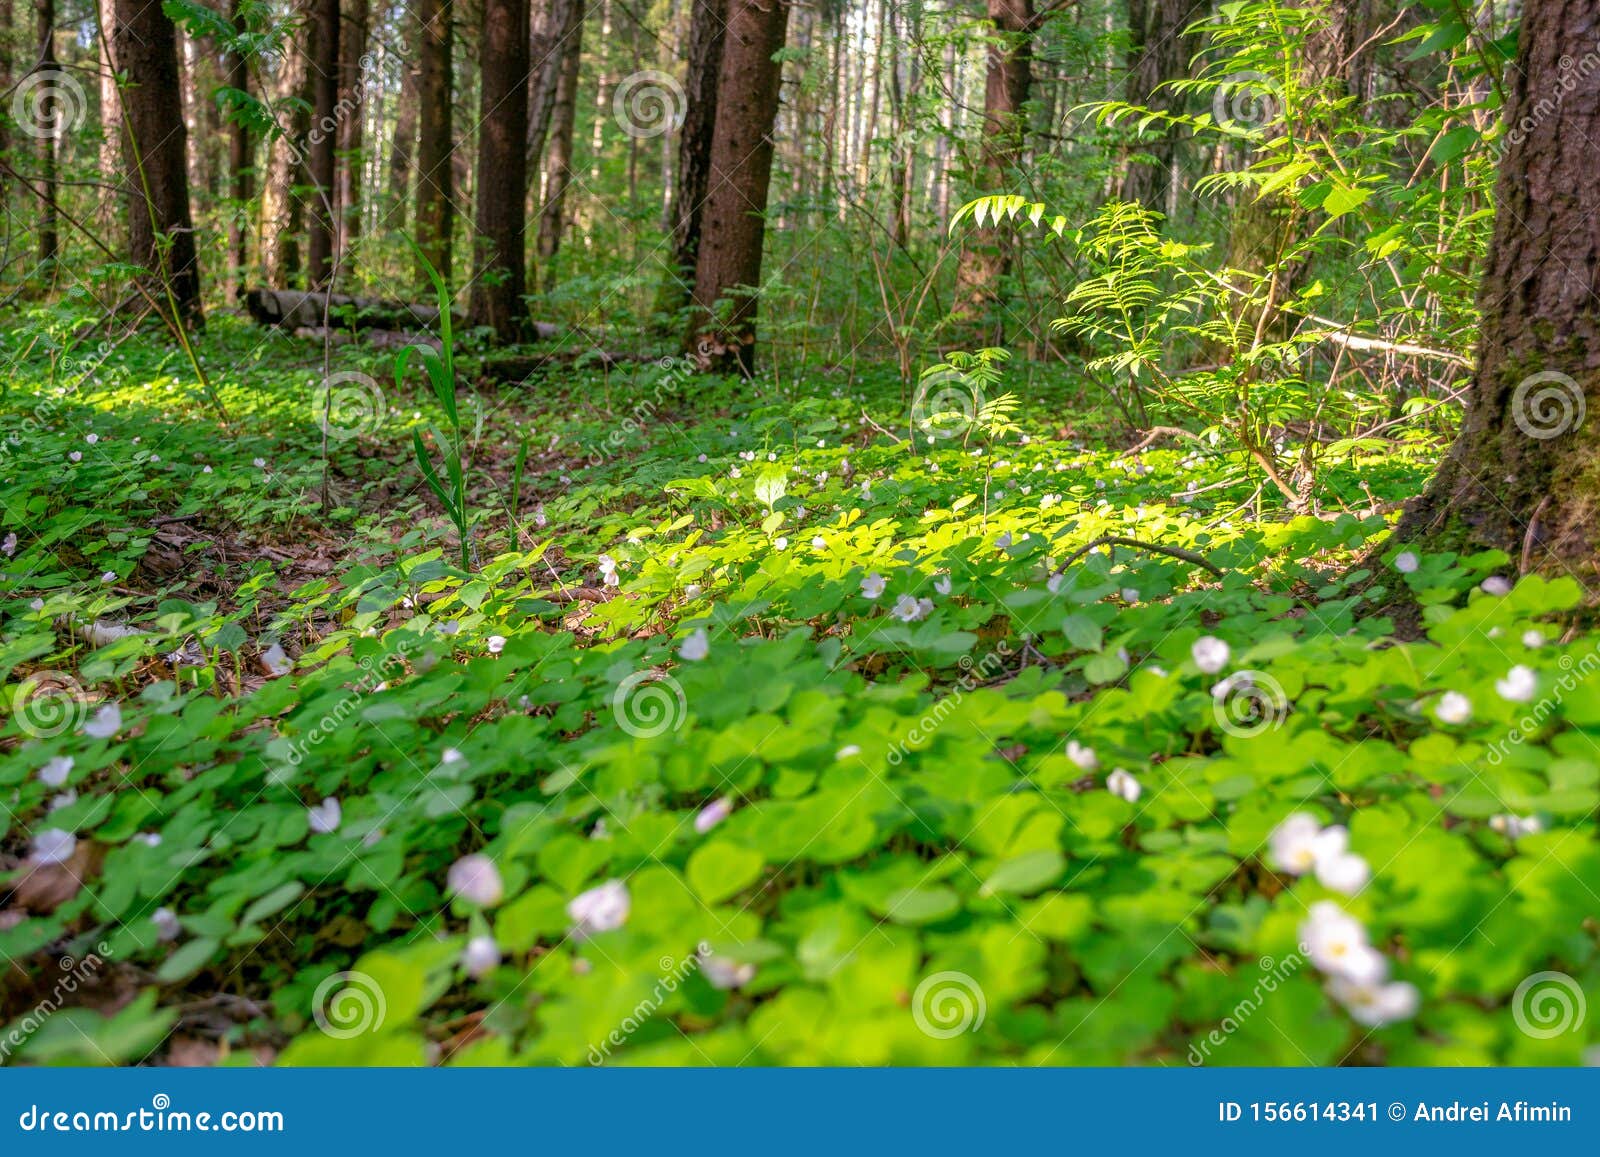 forest glade with delicate white and pink flowers of oxalis oregana redwood sorrel, oregon oxalis next to green leaves.